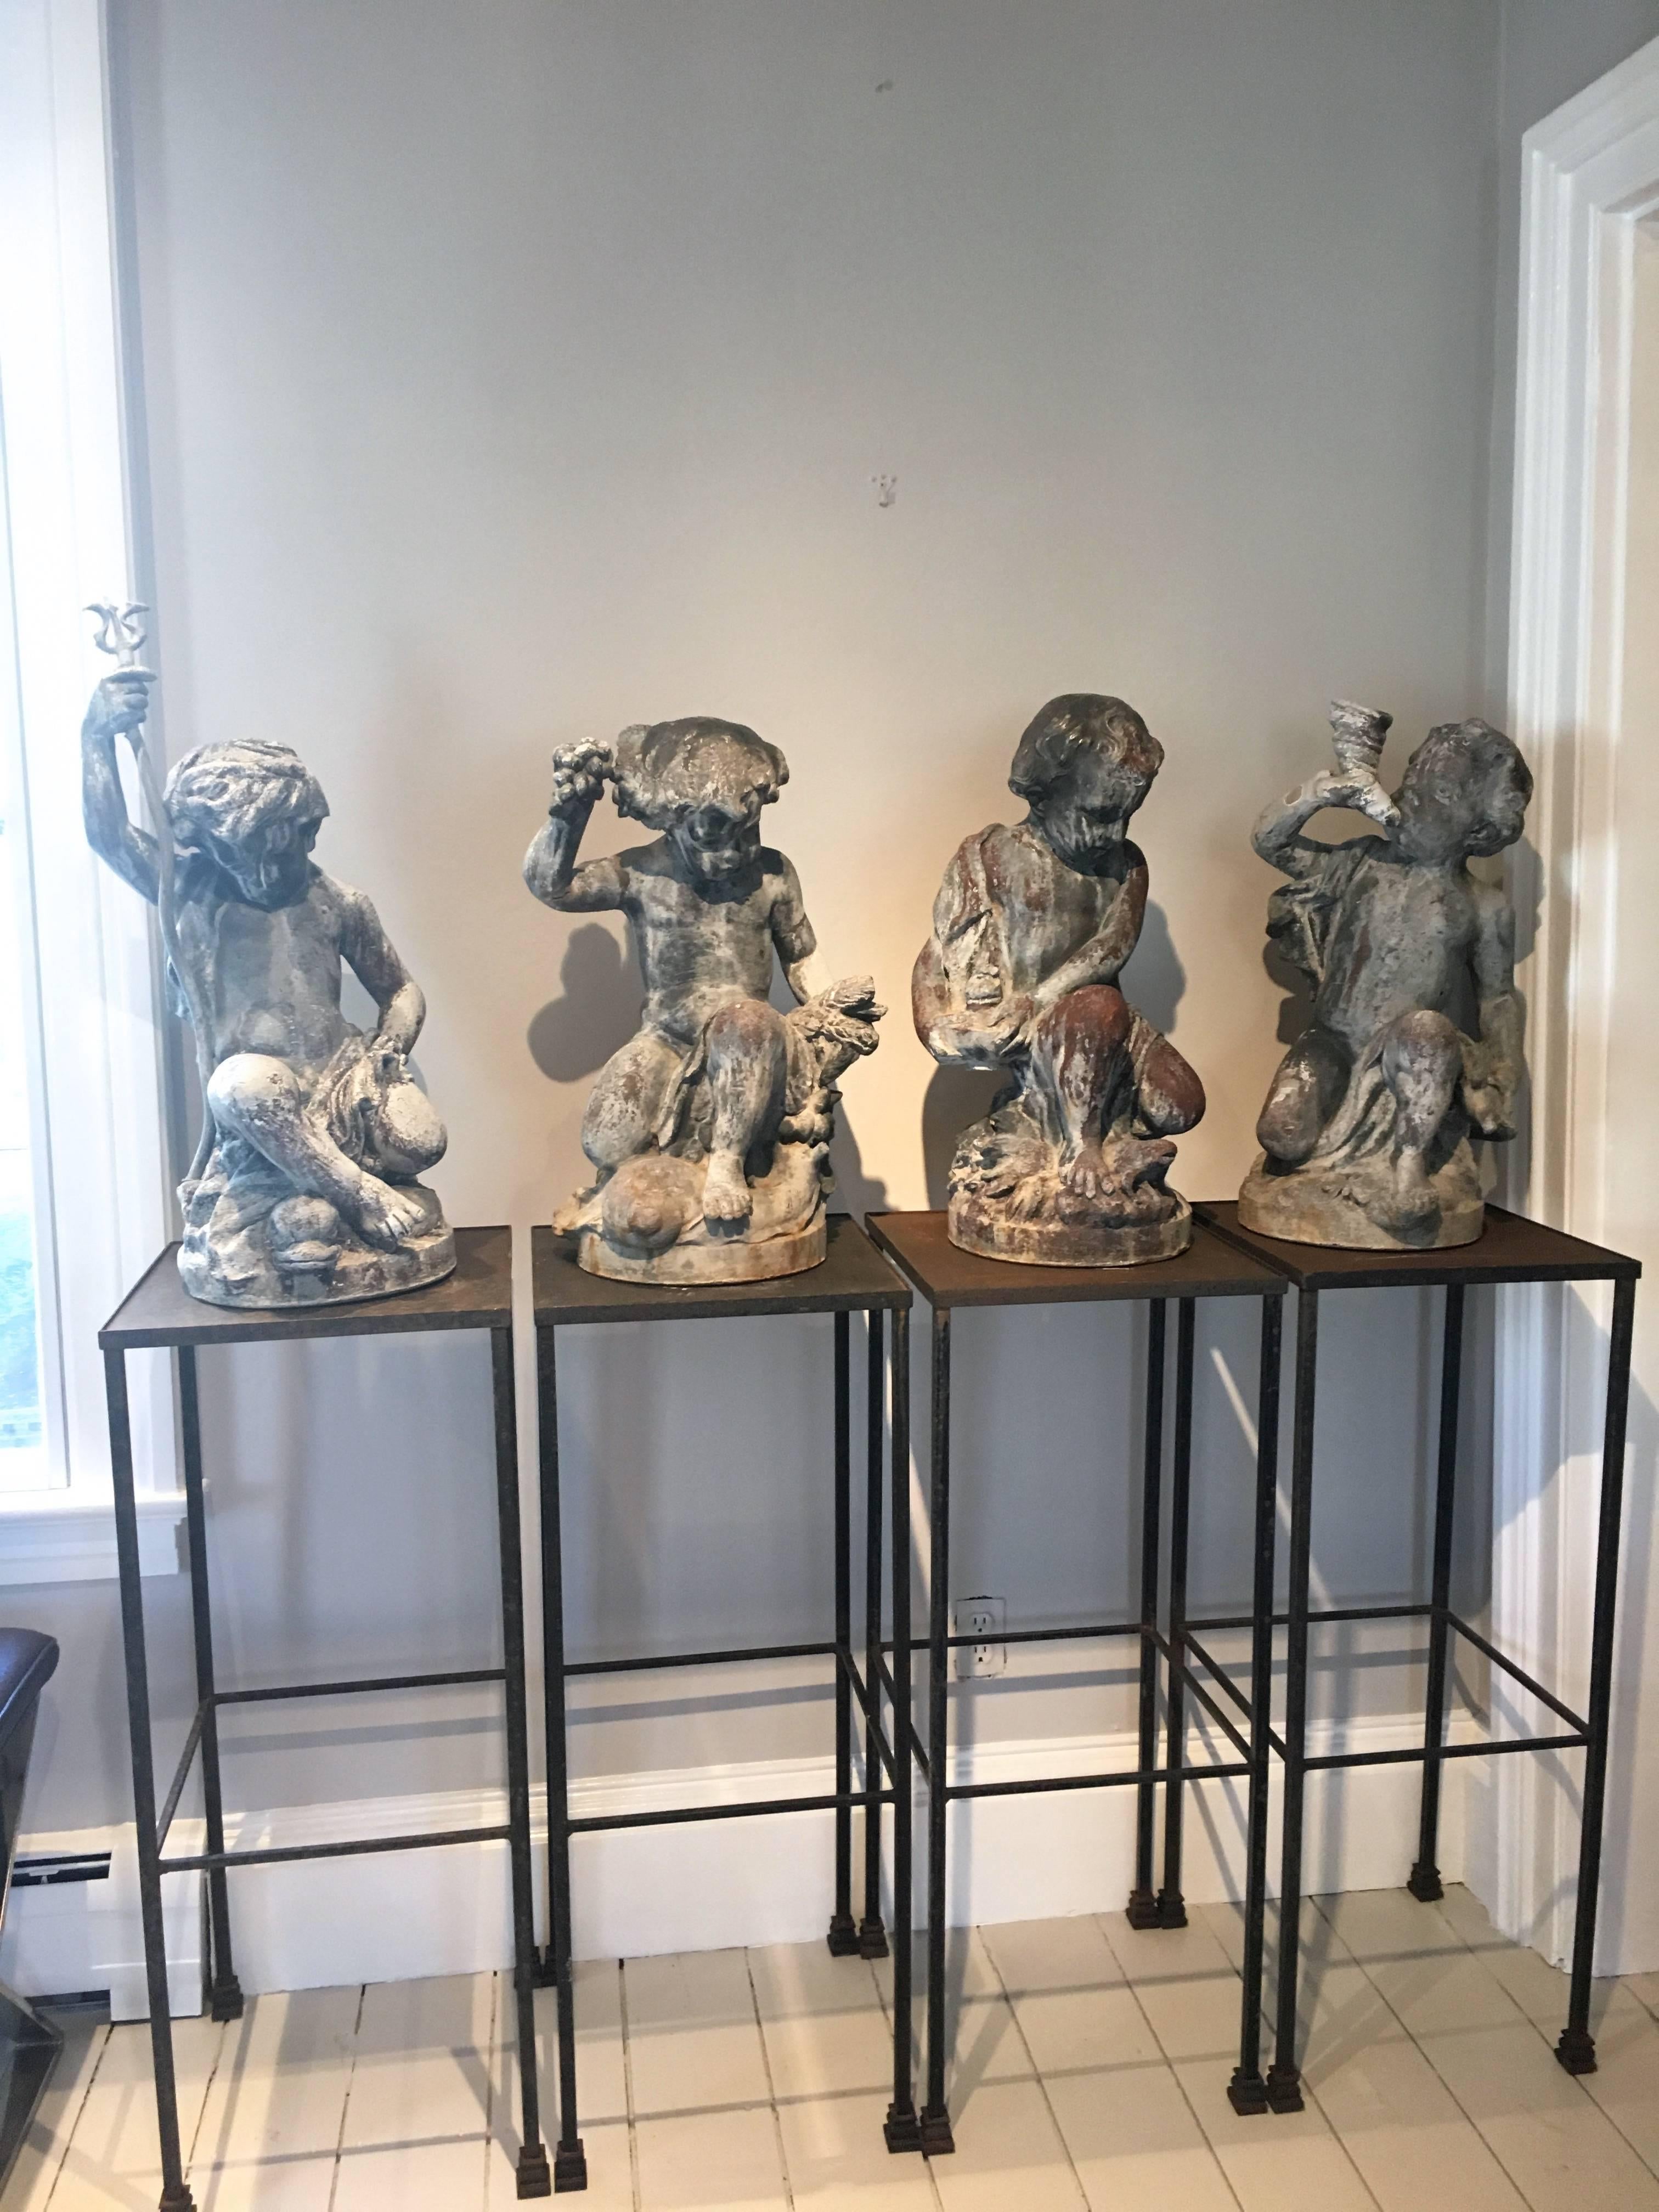 This complete set of The Four Elements by John Parish (J.P.) White, is the most rare and desirable group of garden statuary produced between 1896 and 1938 by the Pyghtle Works in Bedford, England. Representing (from left) Water, Earth, Fire, and